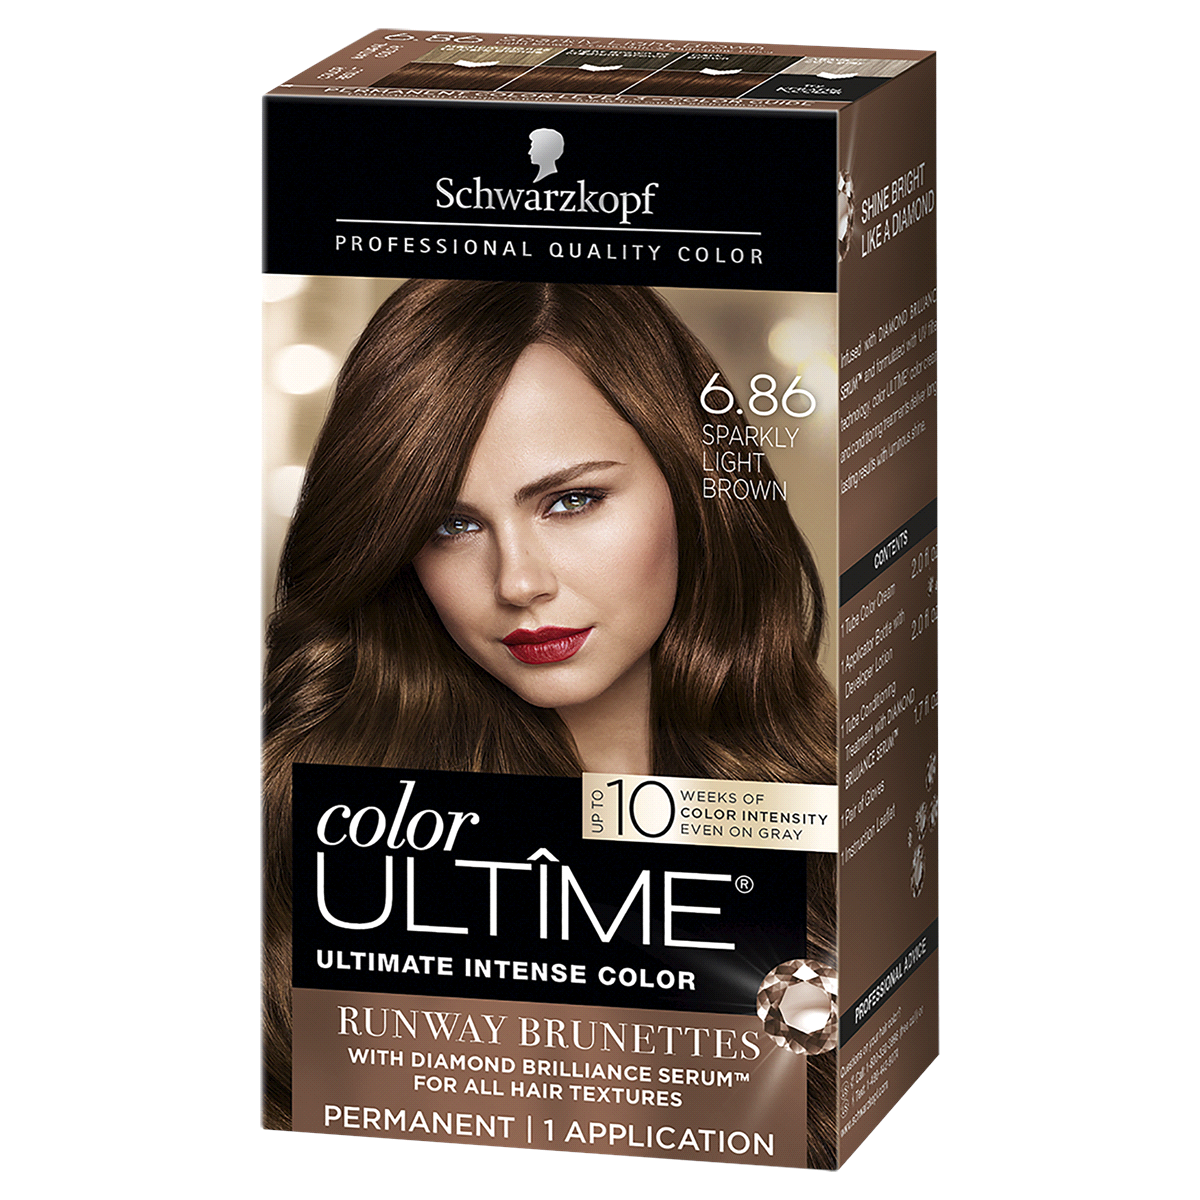 Schwarzkopf Color Ultime Sparkly Light Brown  Hair Color 1 ct | Shipt